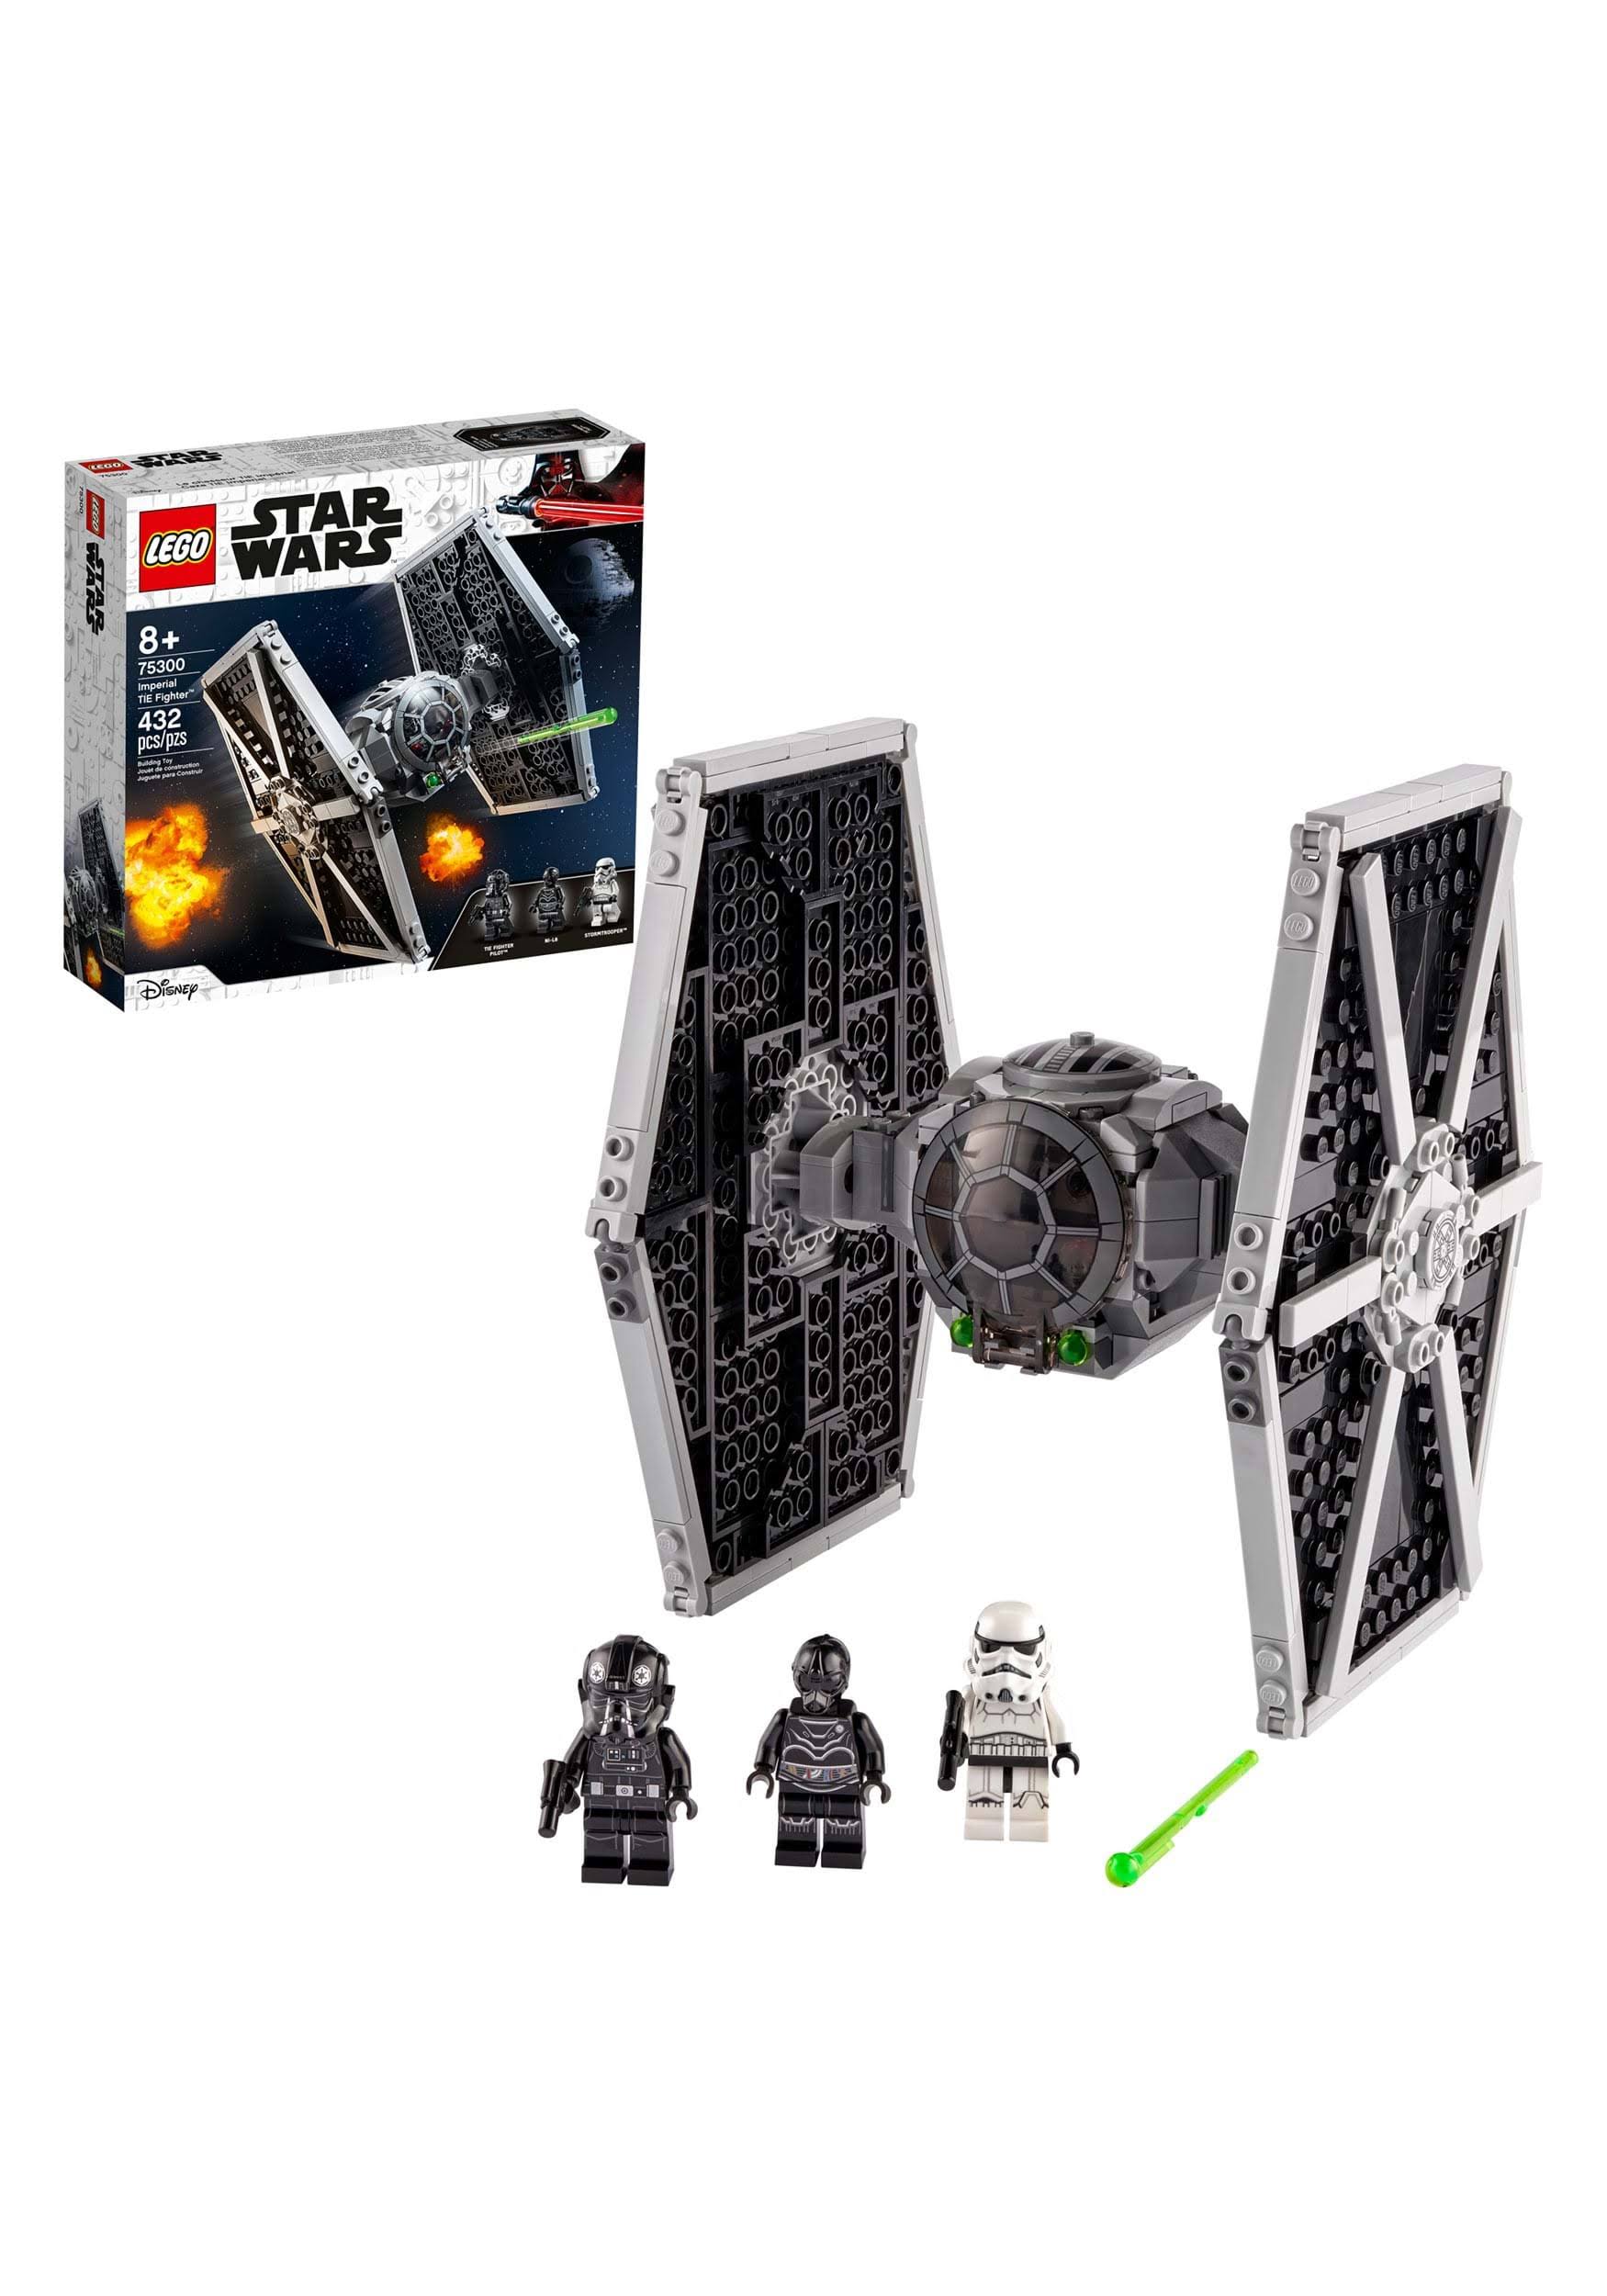 Lego Star Wars Building Toy, Imperial Tie Fighter, 432 Pieces, 8+